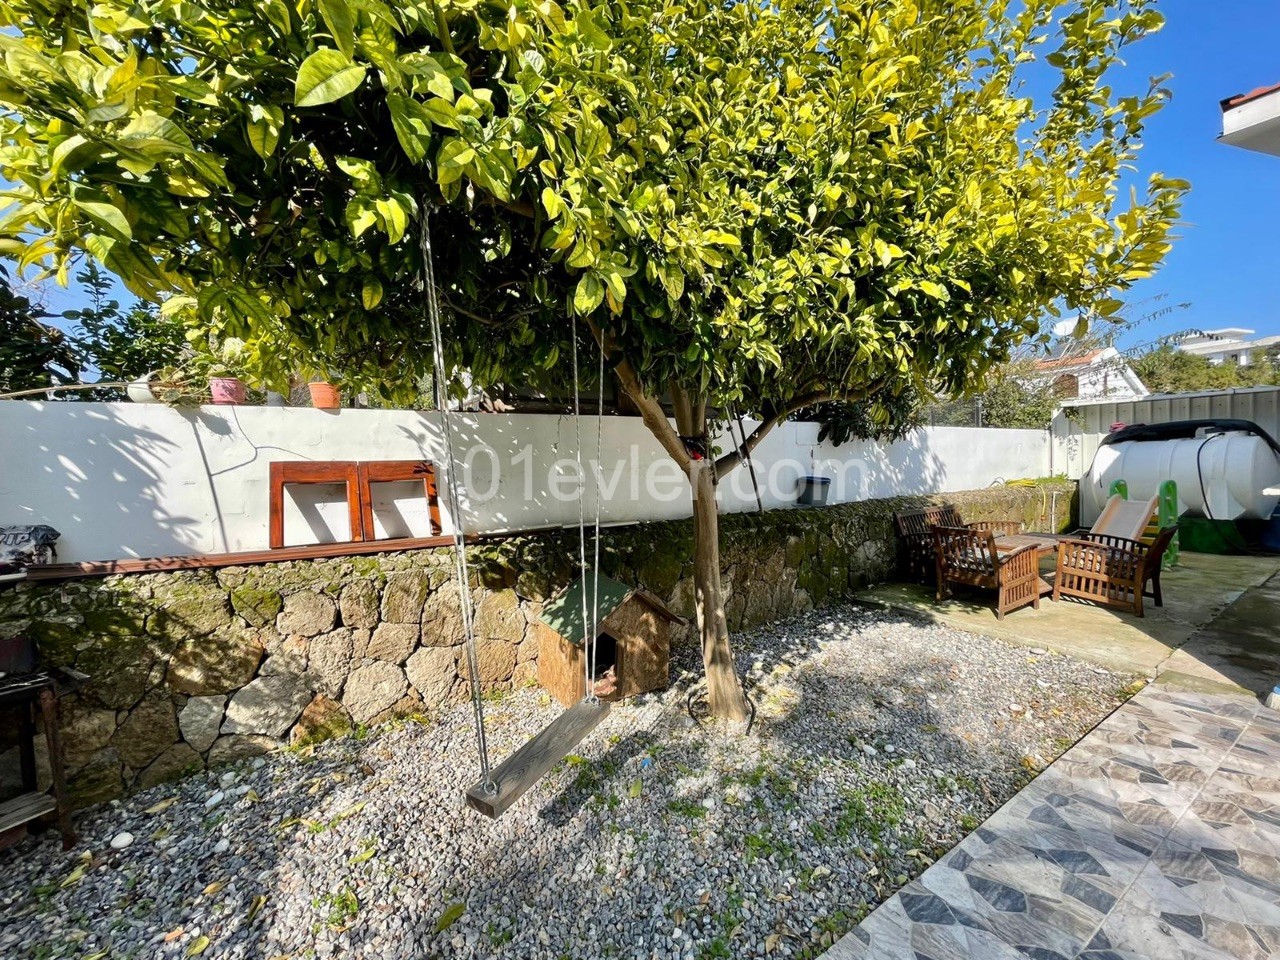 2+1 detached house for sale in Doğanköy with detached garden and separate kitchen ** 